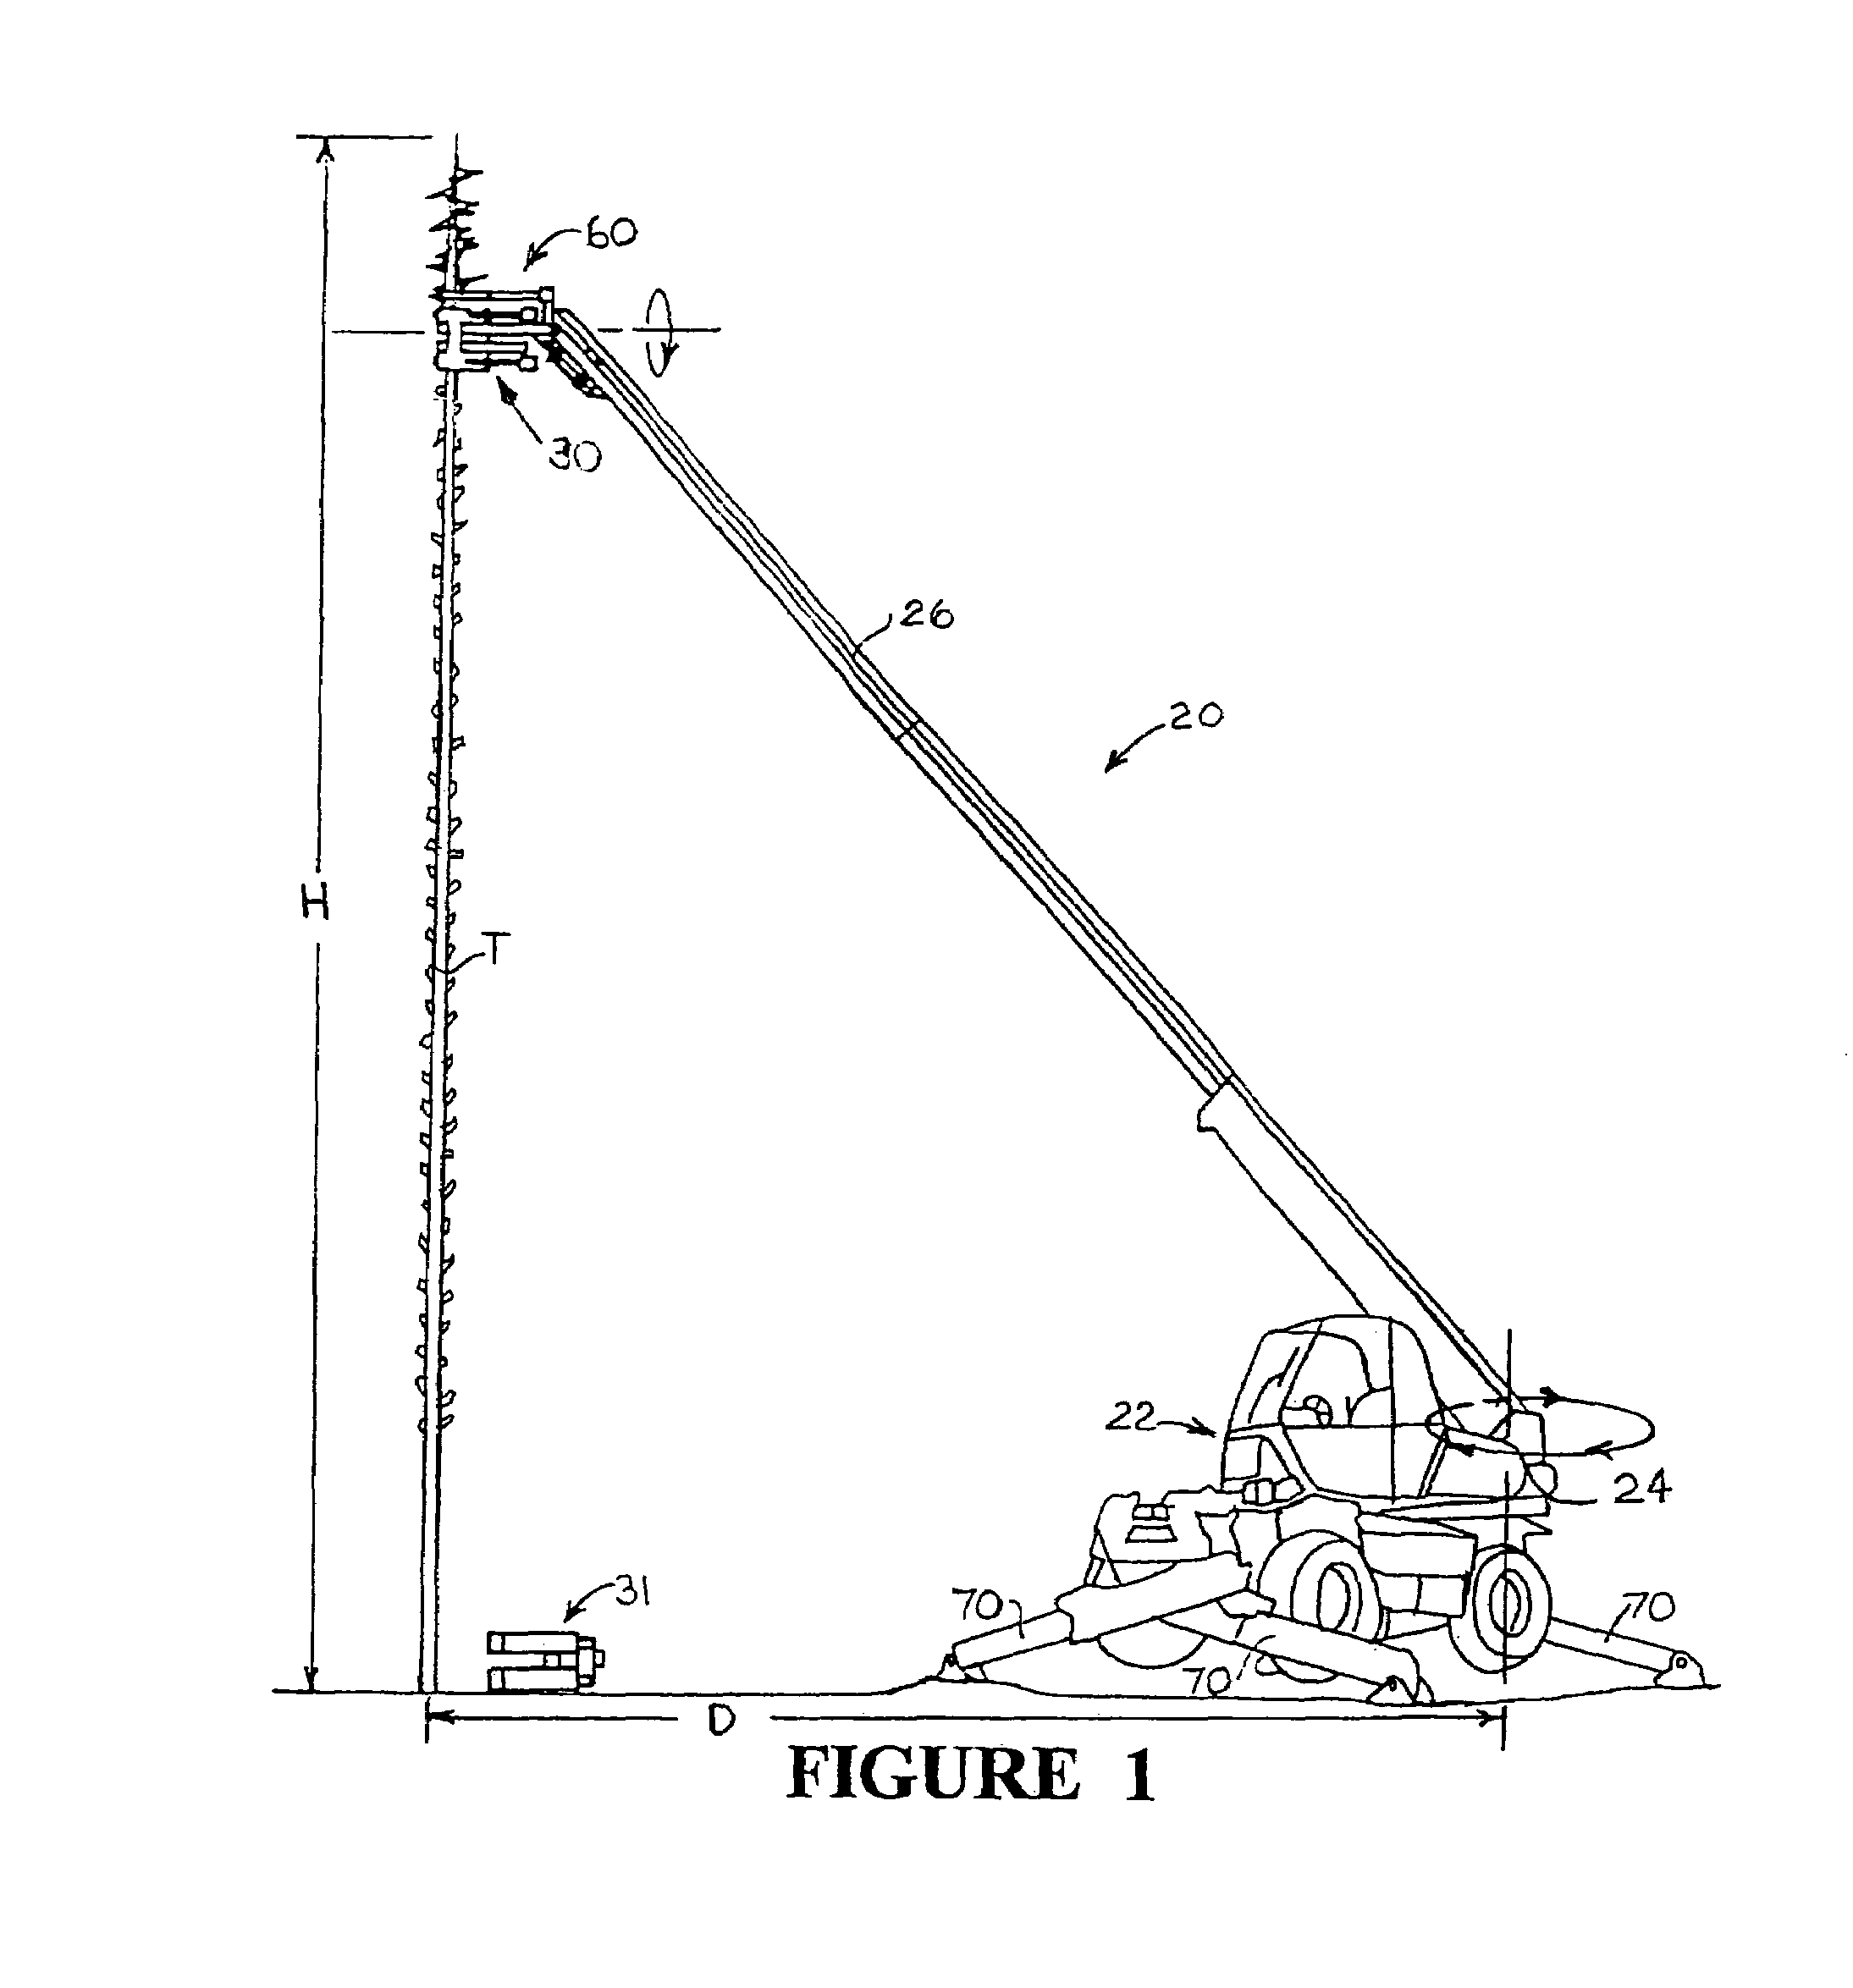 Tree harvesting apparatus and method which enable a cut top or other cut portion of a tree to be weighed before being dropped or lowered to the ground